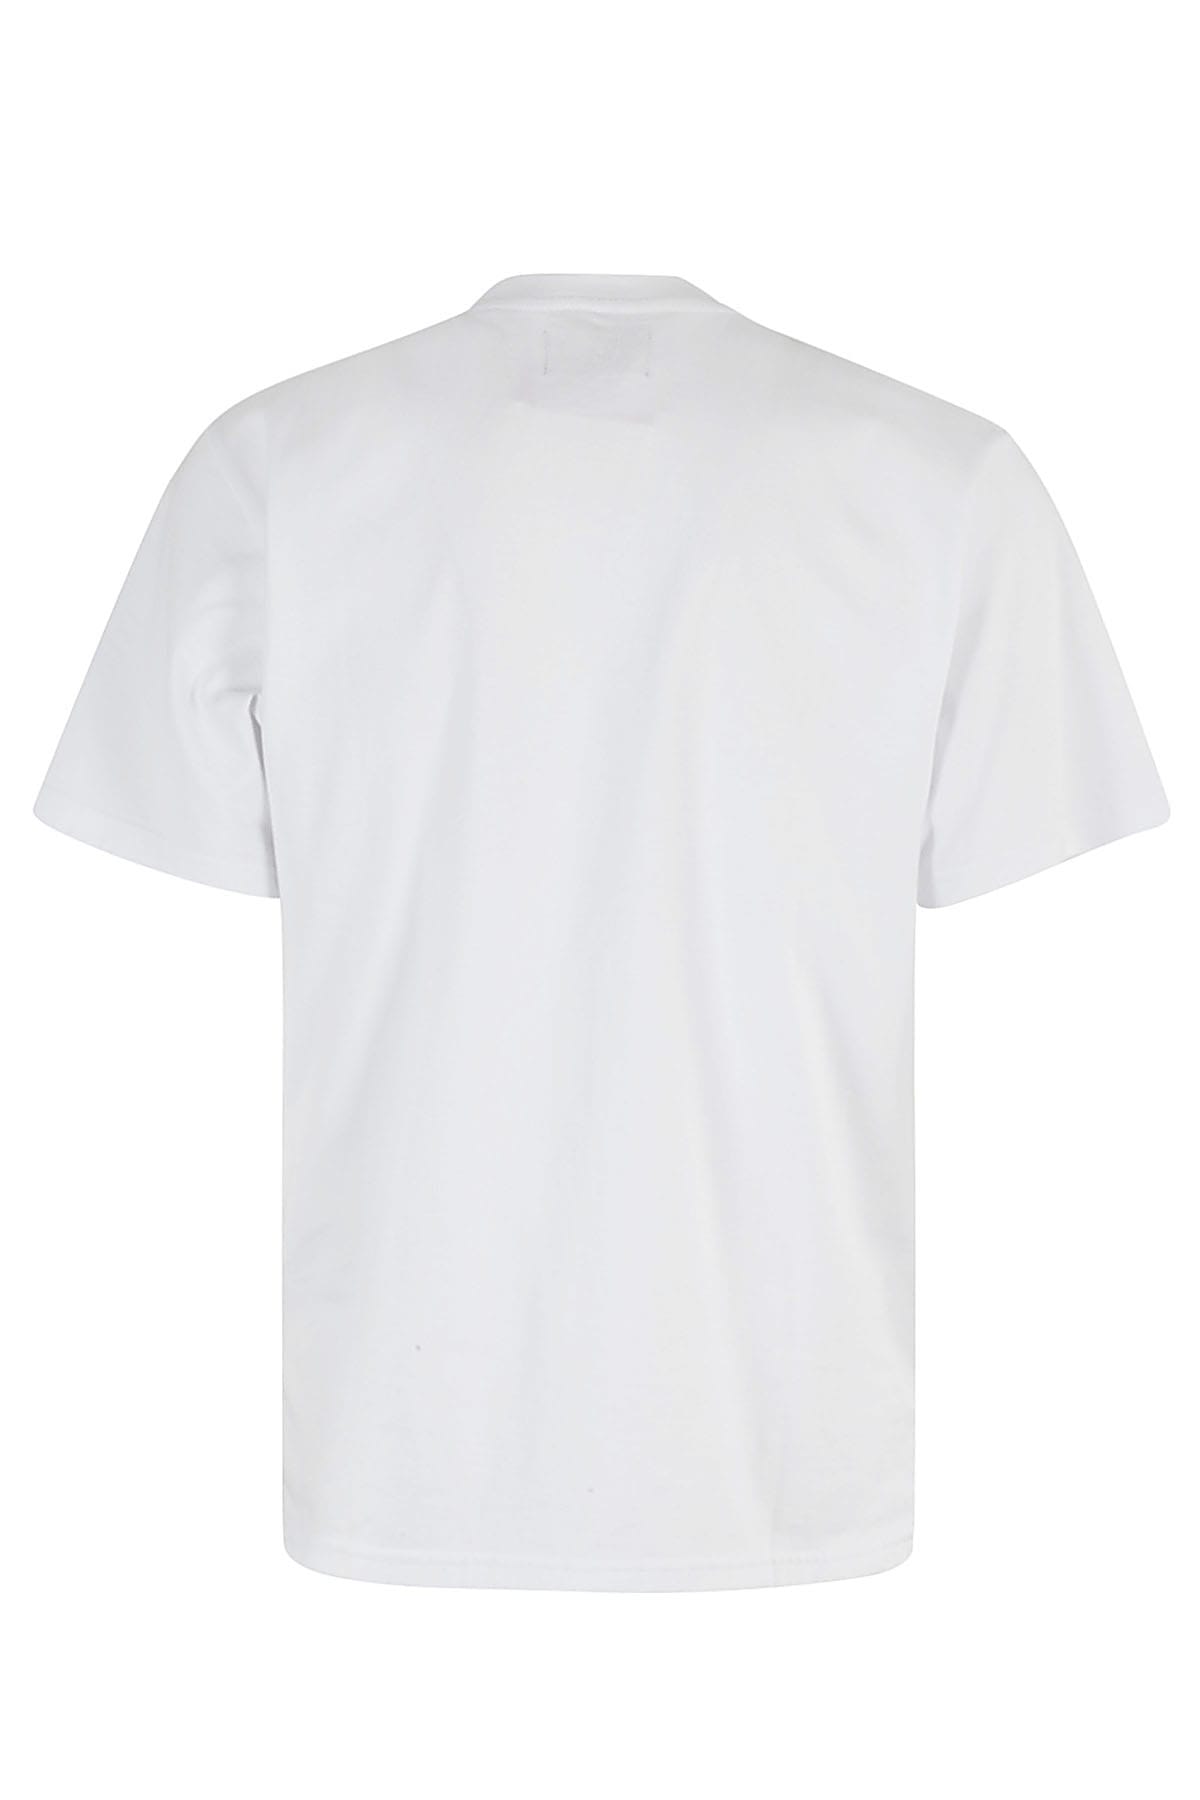 Shop Liberal Youth Ministry Fuego Nuevo In White